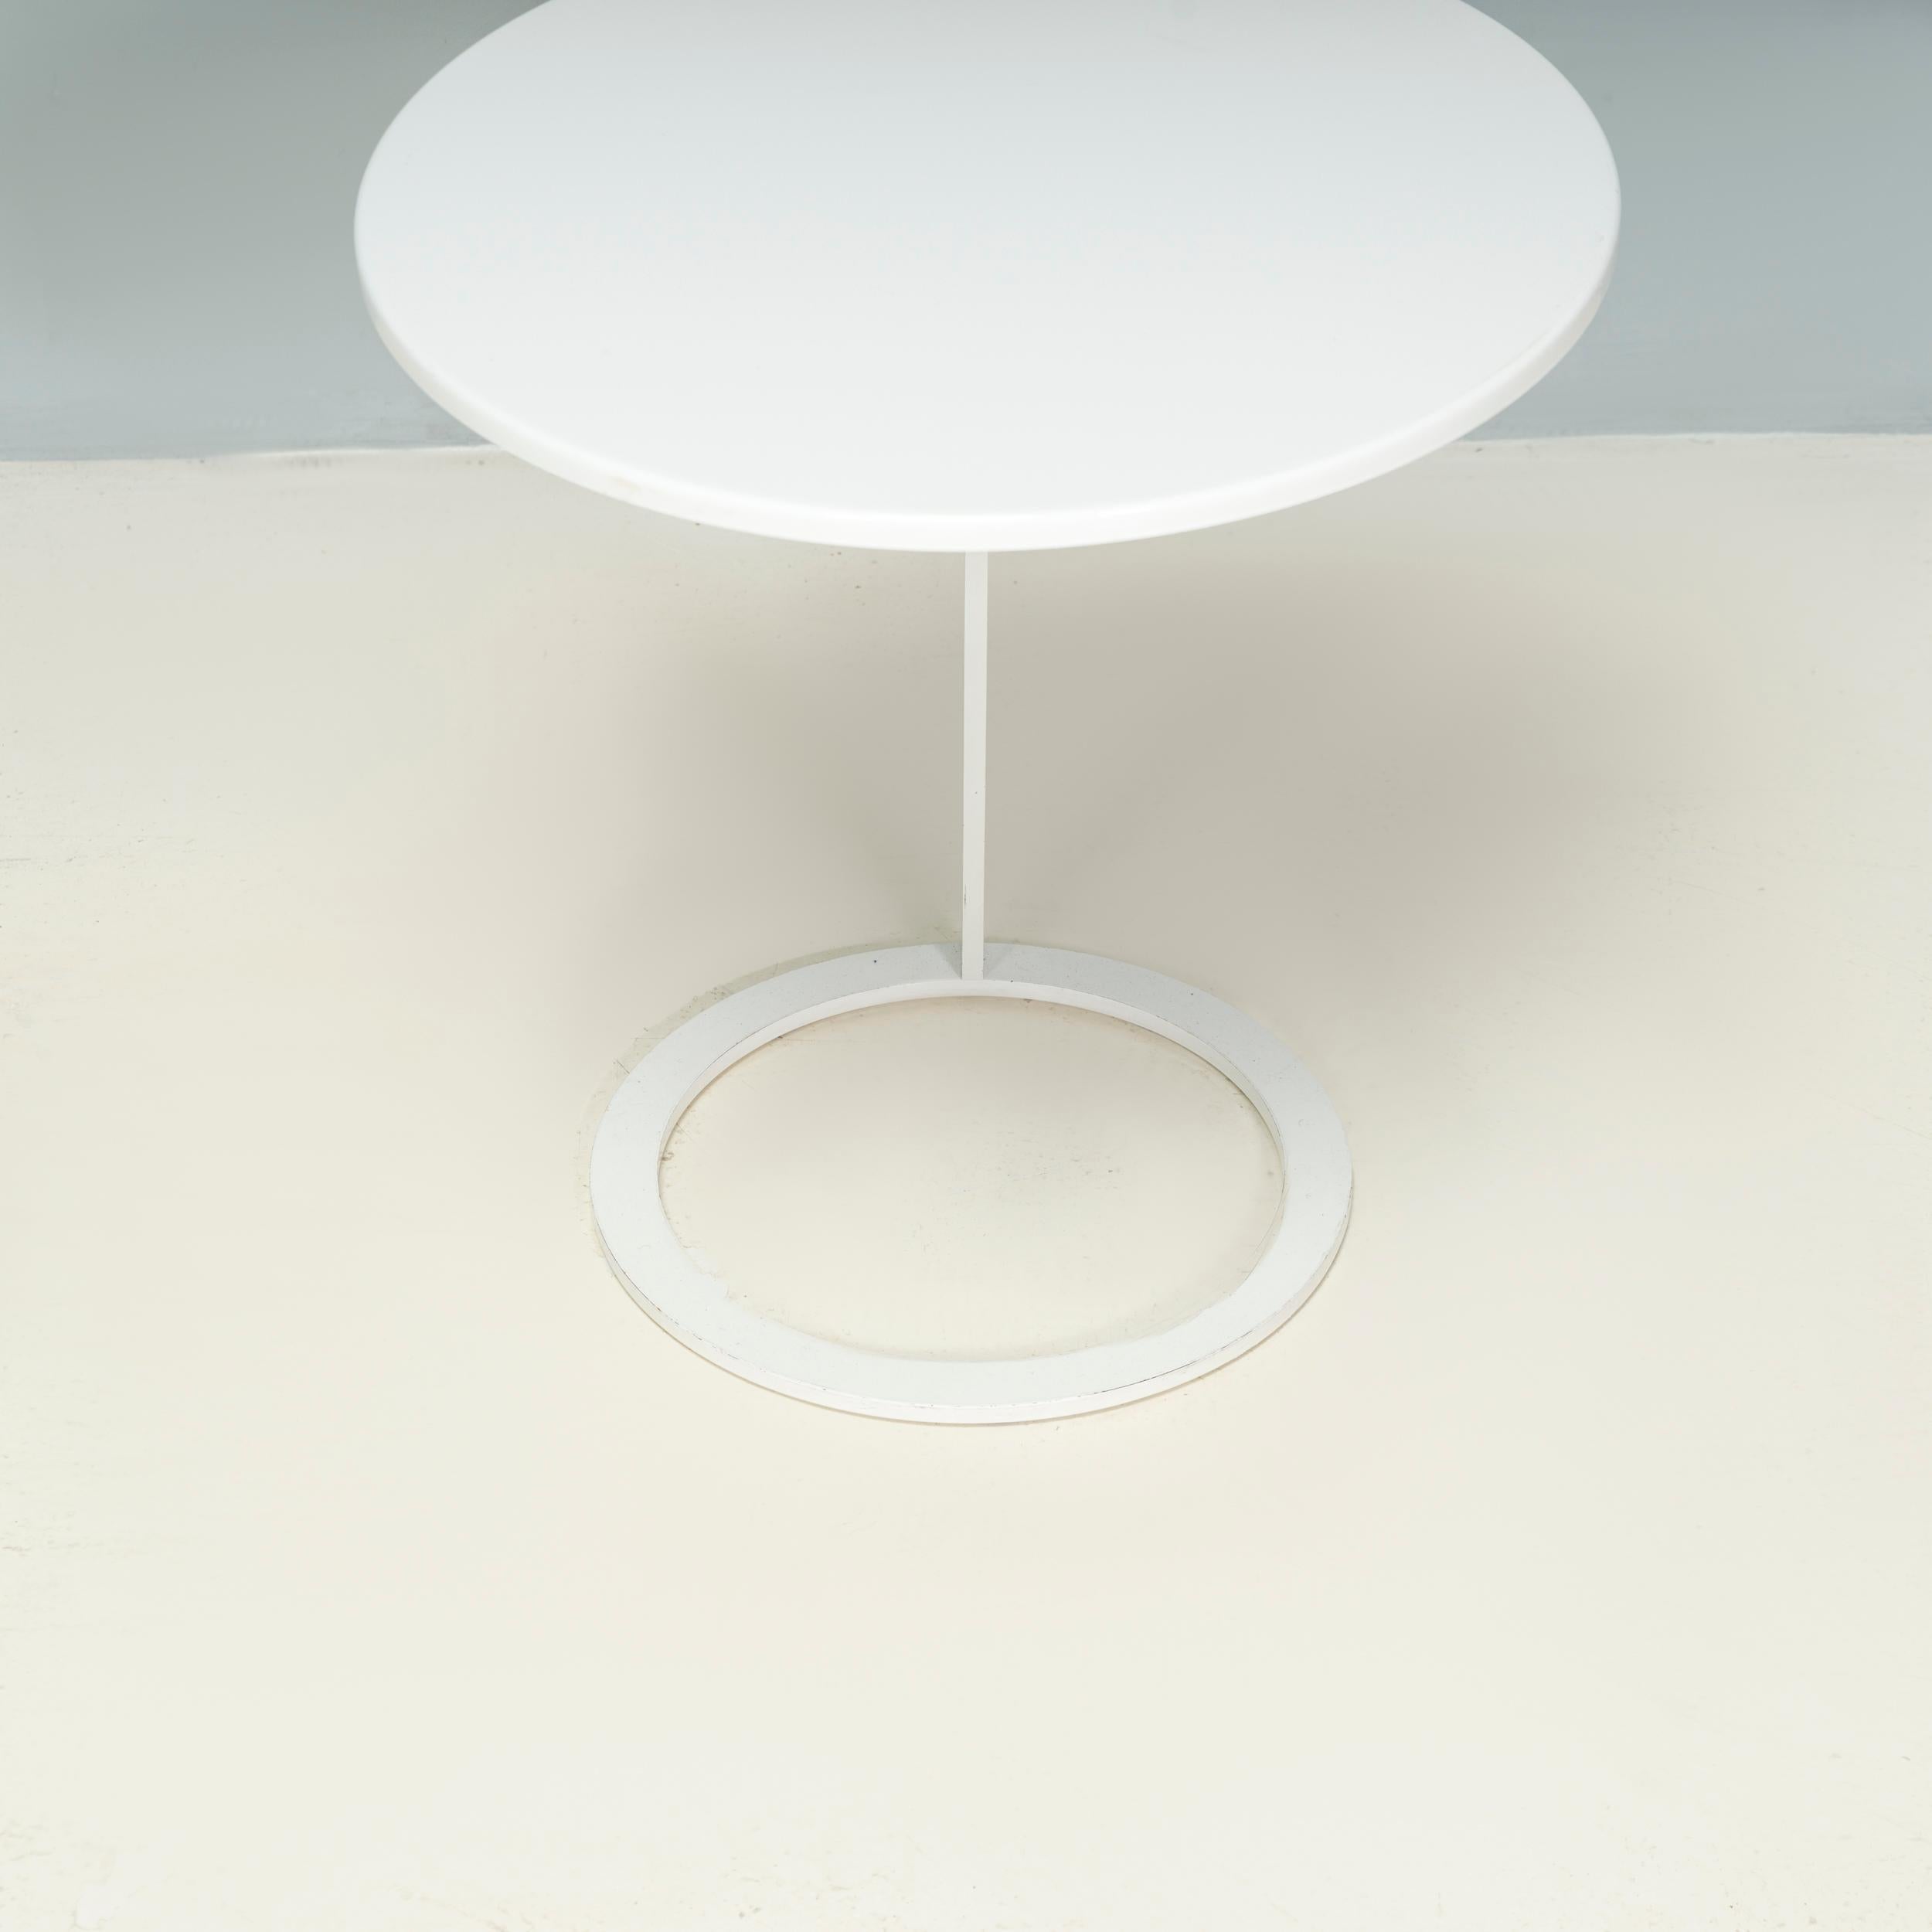 Alban-Sébastien Gilles for Ligne Roset White Good Morning Table In Good Condition For Sale In London, GB